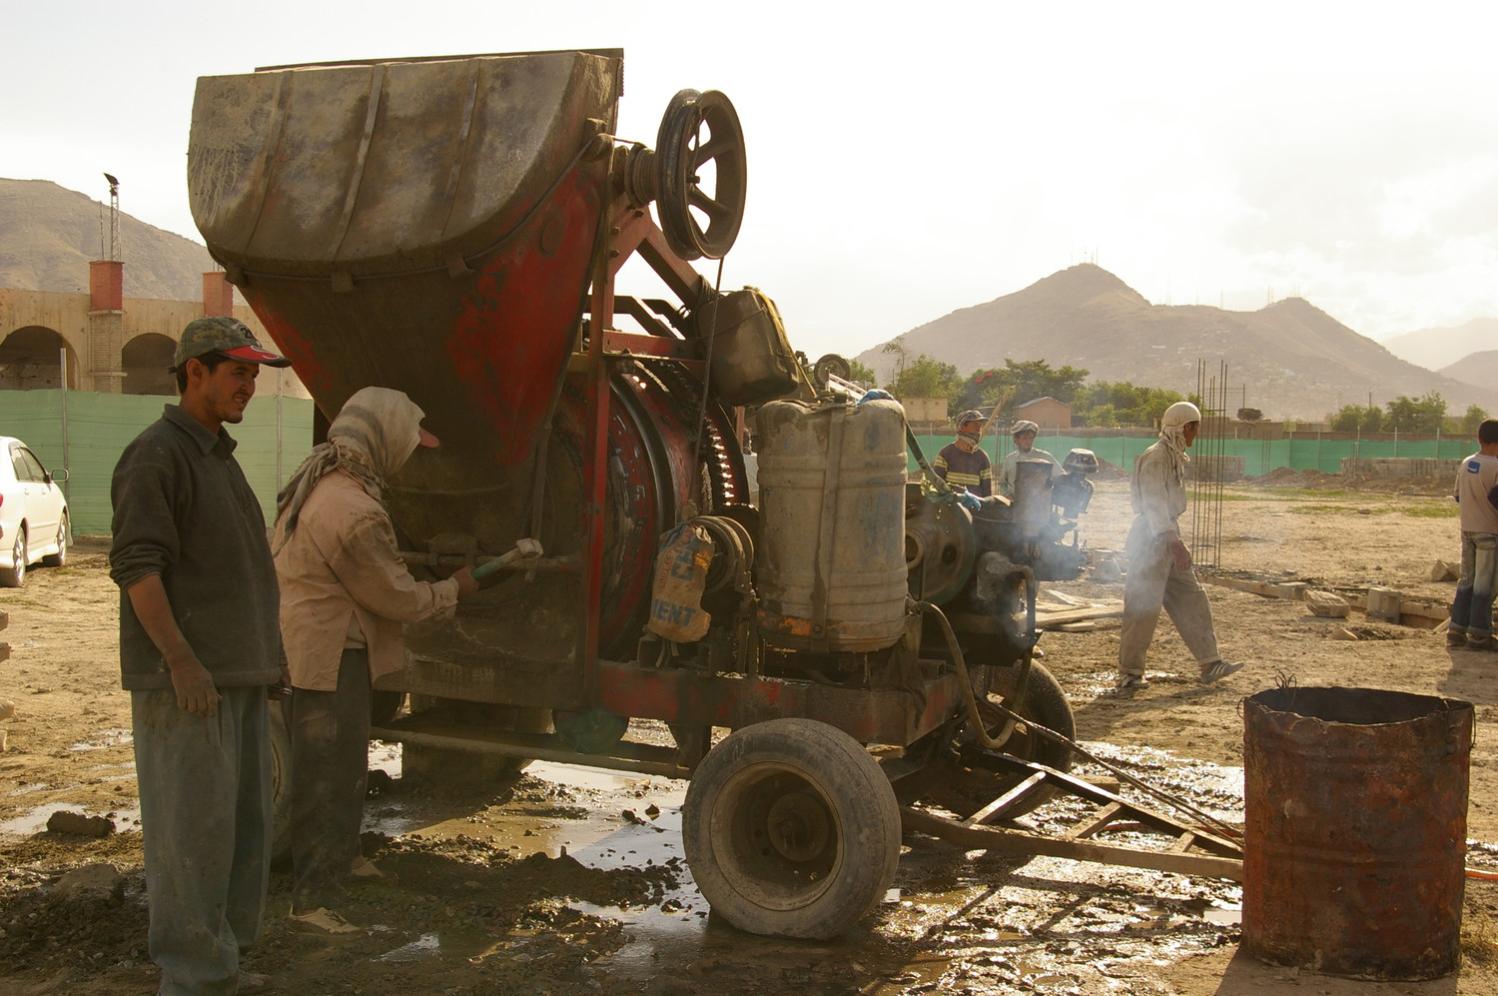 ACCL labourers mix cement for the foundation of the Skateistan Kabul facility